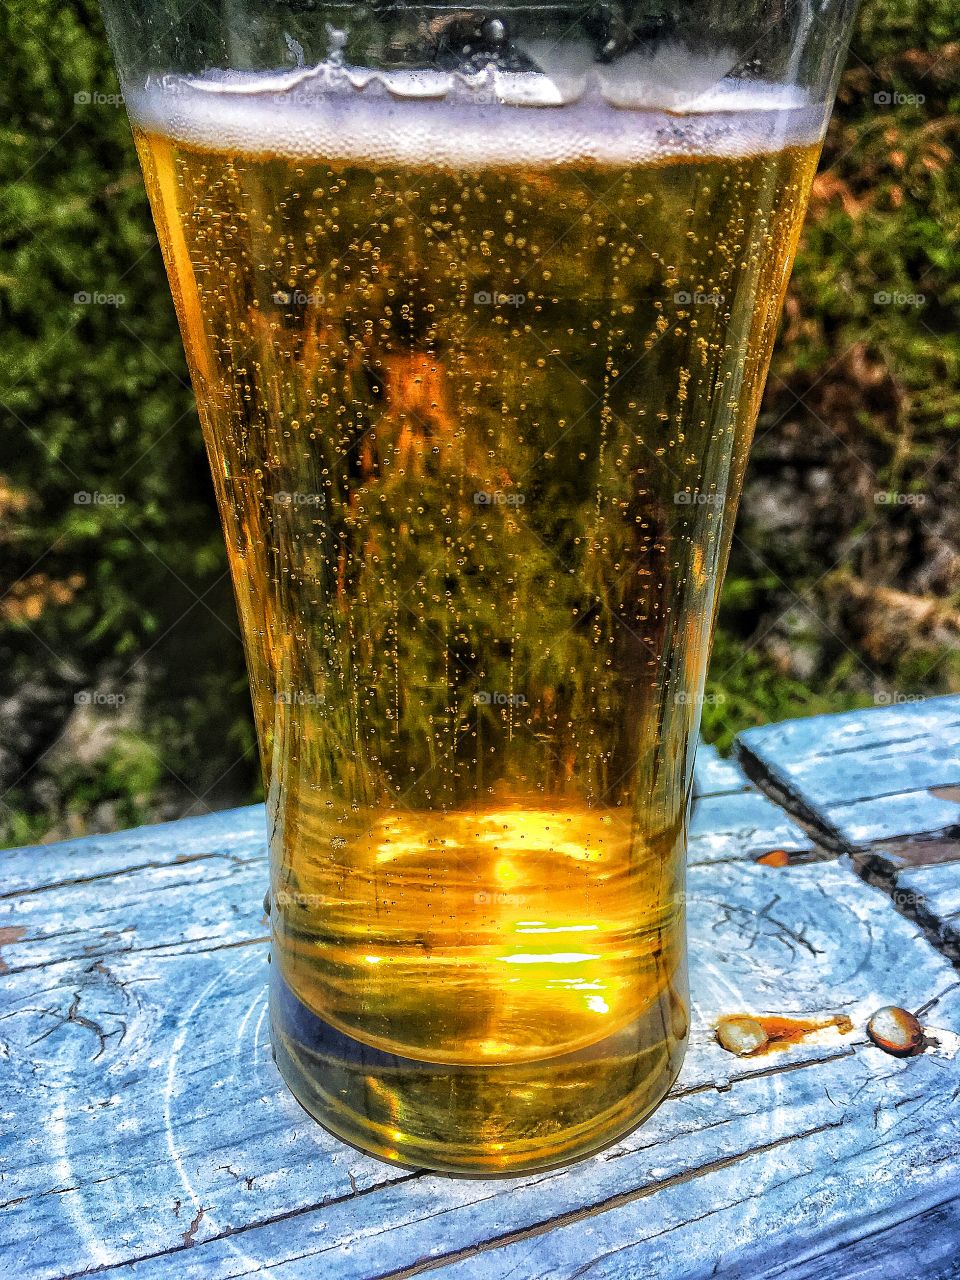 Ice cold beer on hot day 